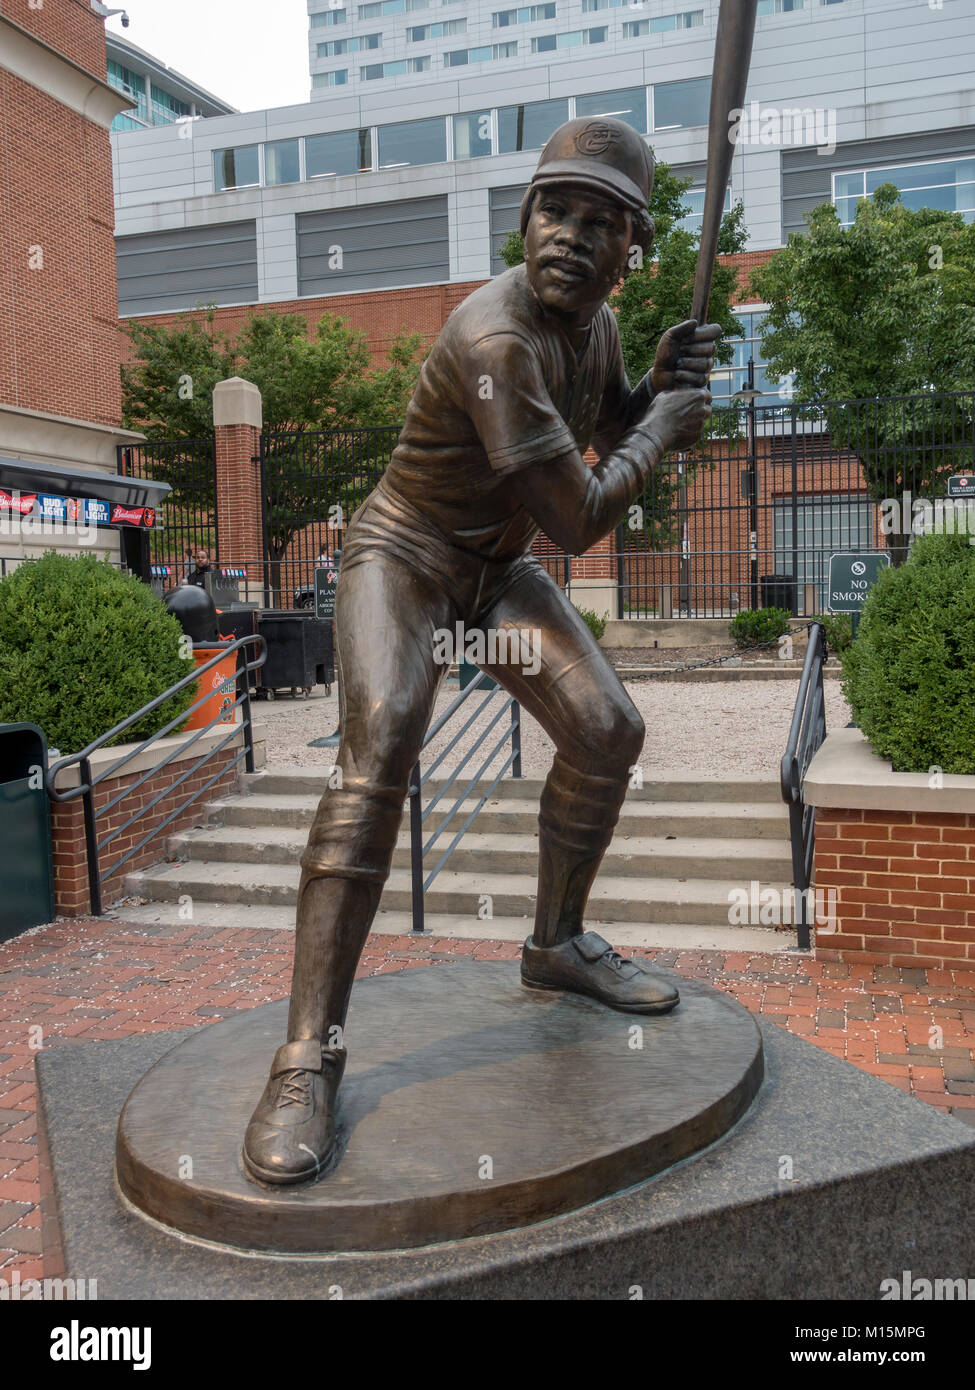 Hall of Famer sculpture of Eddie Murray at Oriole Park at Camden